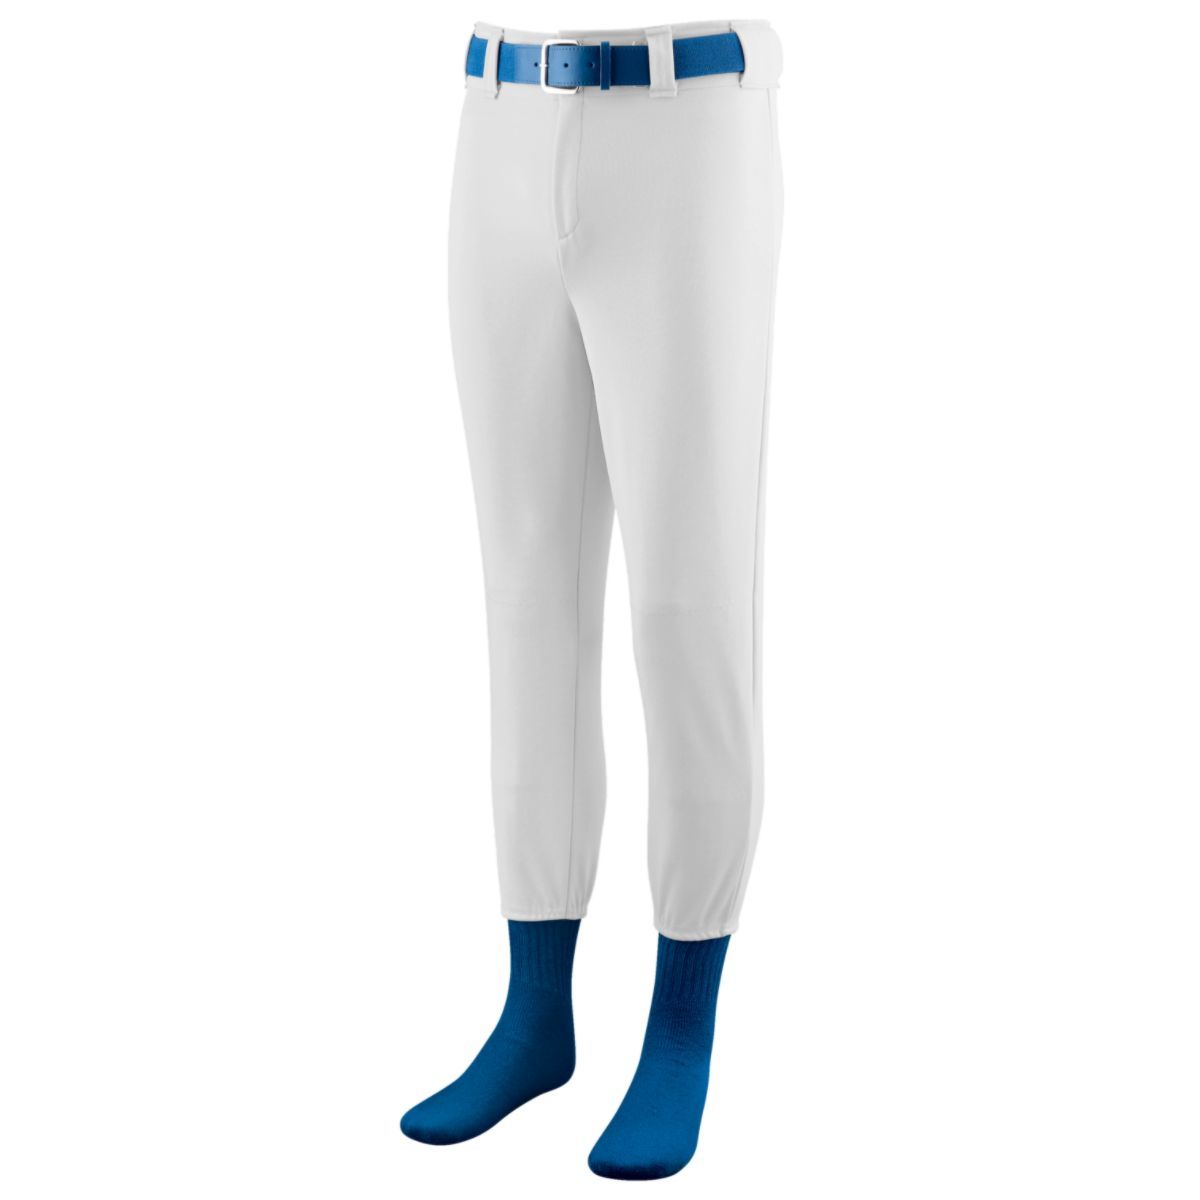 Augusta Sportswear Youth Softball/Baseball Pant in White  -Part of the Youth, Youth-Pants, Pants, Augusta-Products, Softball product lines at KanaleyCreations.com